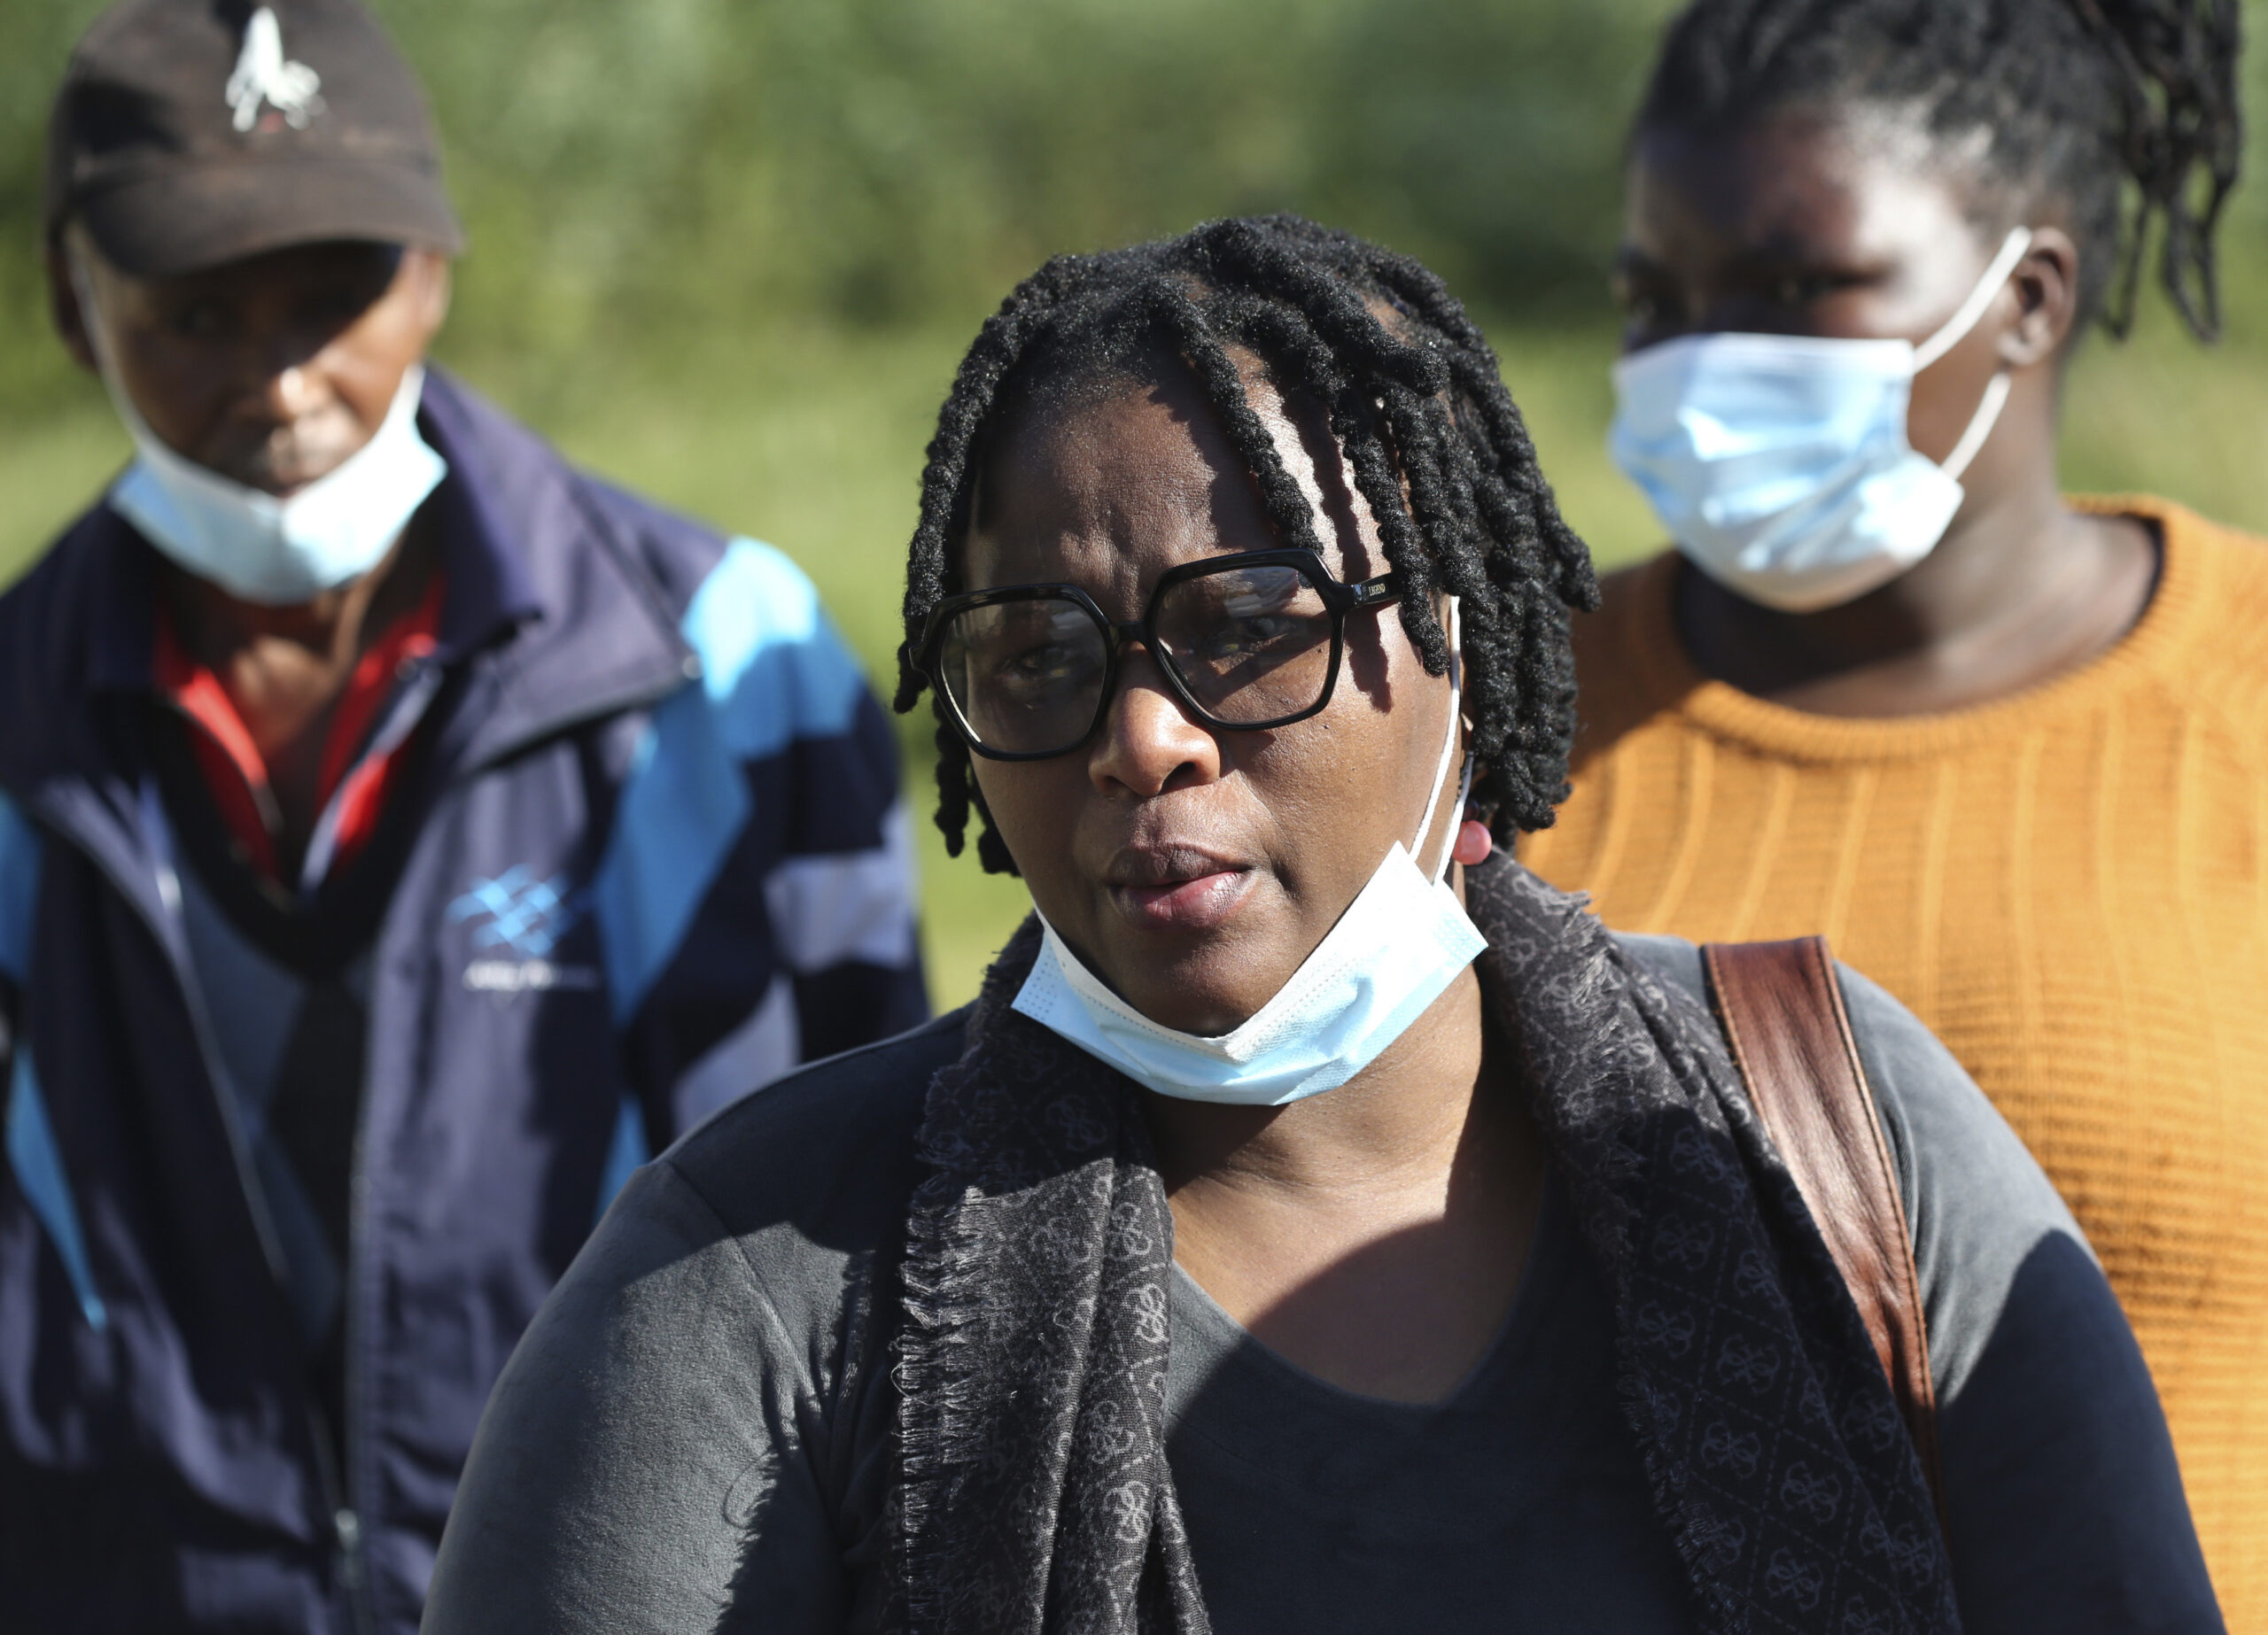 Yandiswa Ngqoza, with family members after identifying her daughters at the Woodbrook Mortuary in East London, South Africa Monday, June 27, 2022. South African authorities are seeking answers after 21 underage teenagers celebrating the end of school exams died in a mysterious weekend incident at a nightclub. The bodies of many of the victims were discovered by police lying on tables, slumped over chairs and sprawled on the floor of the club in the early hours of Sunday morning. (AP Photo)